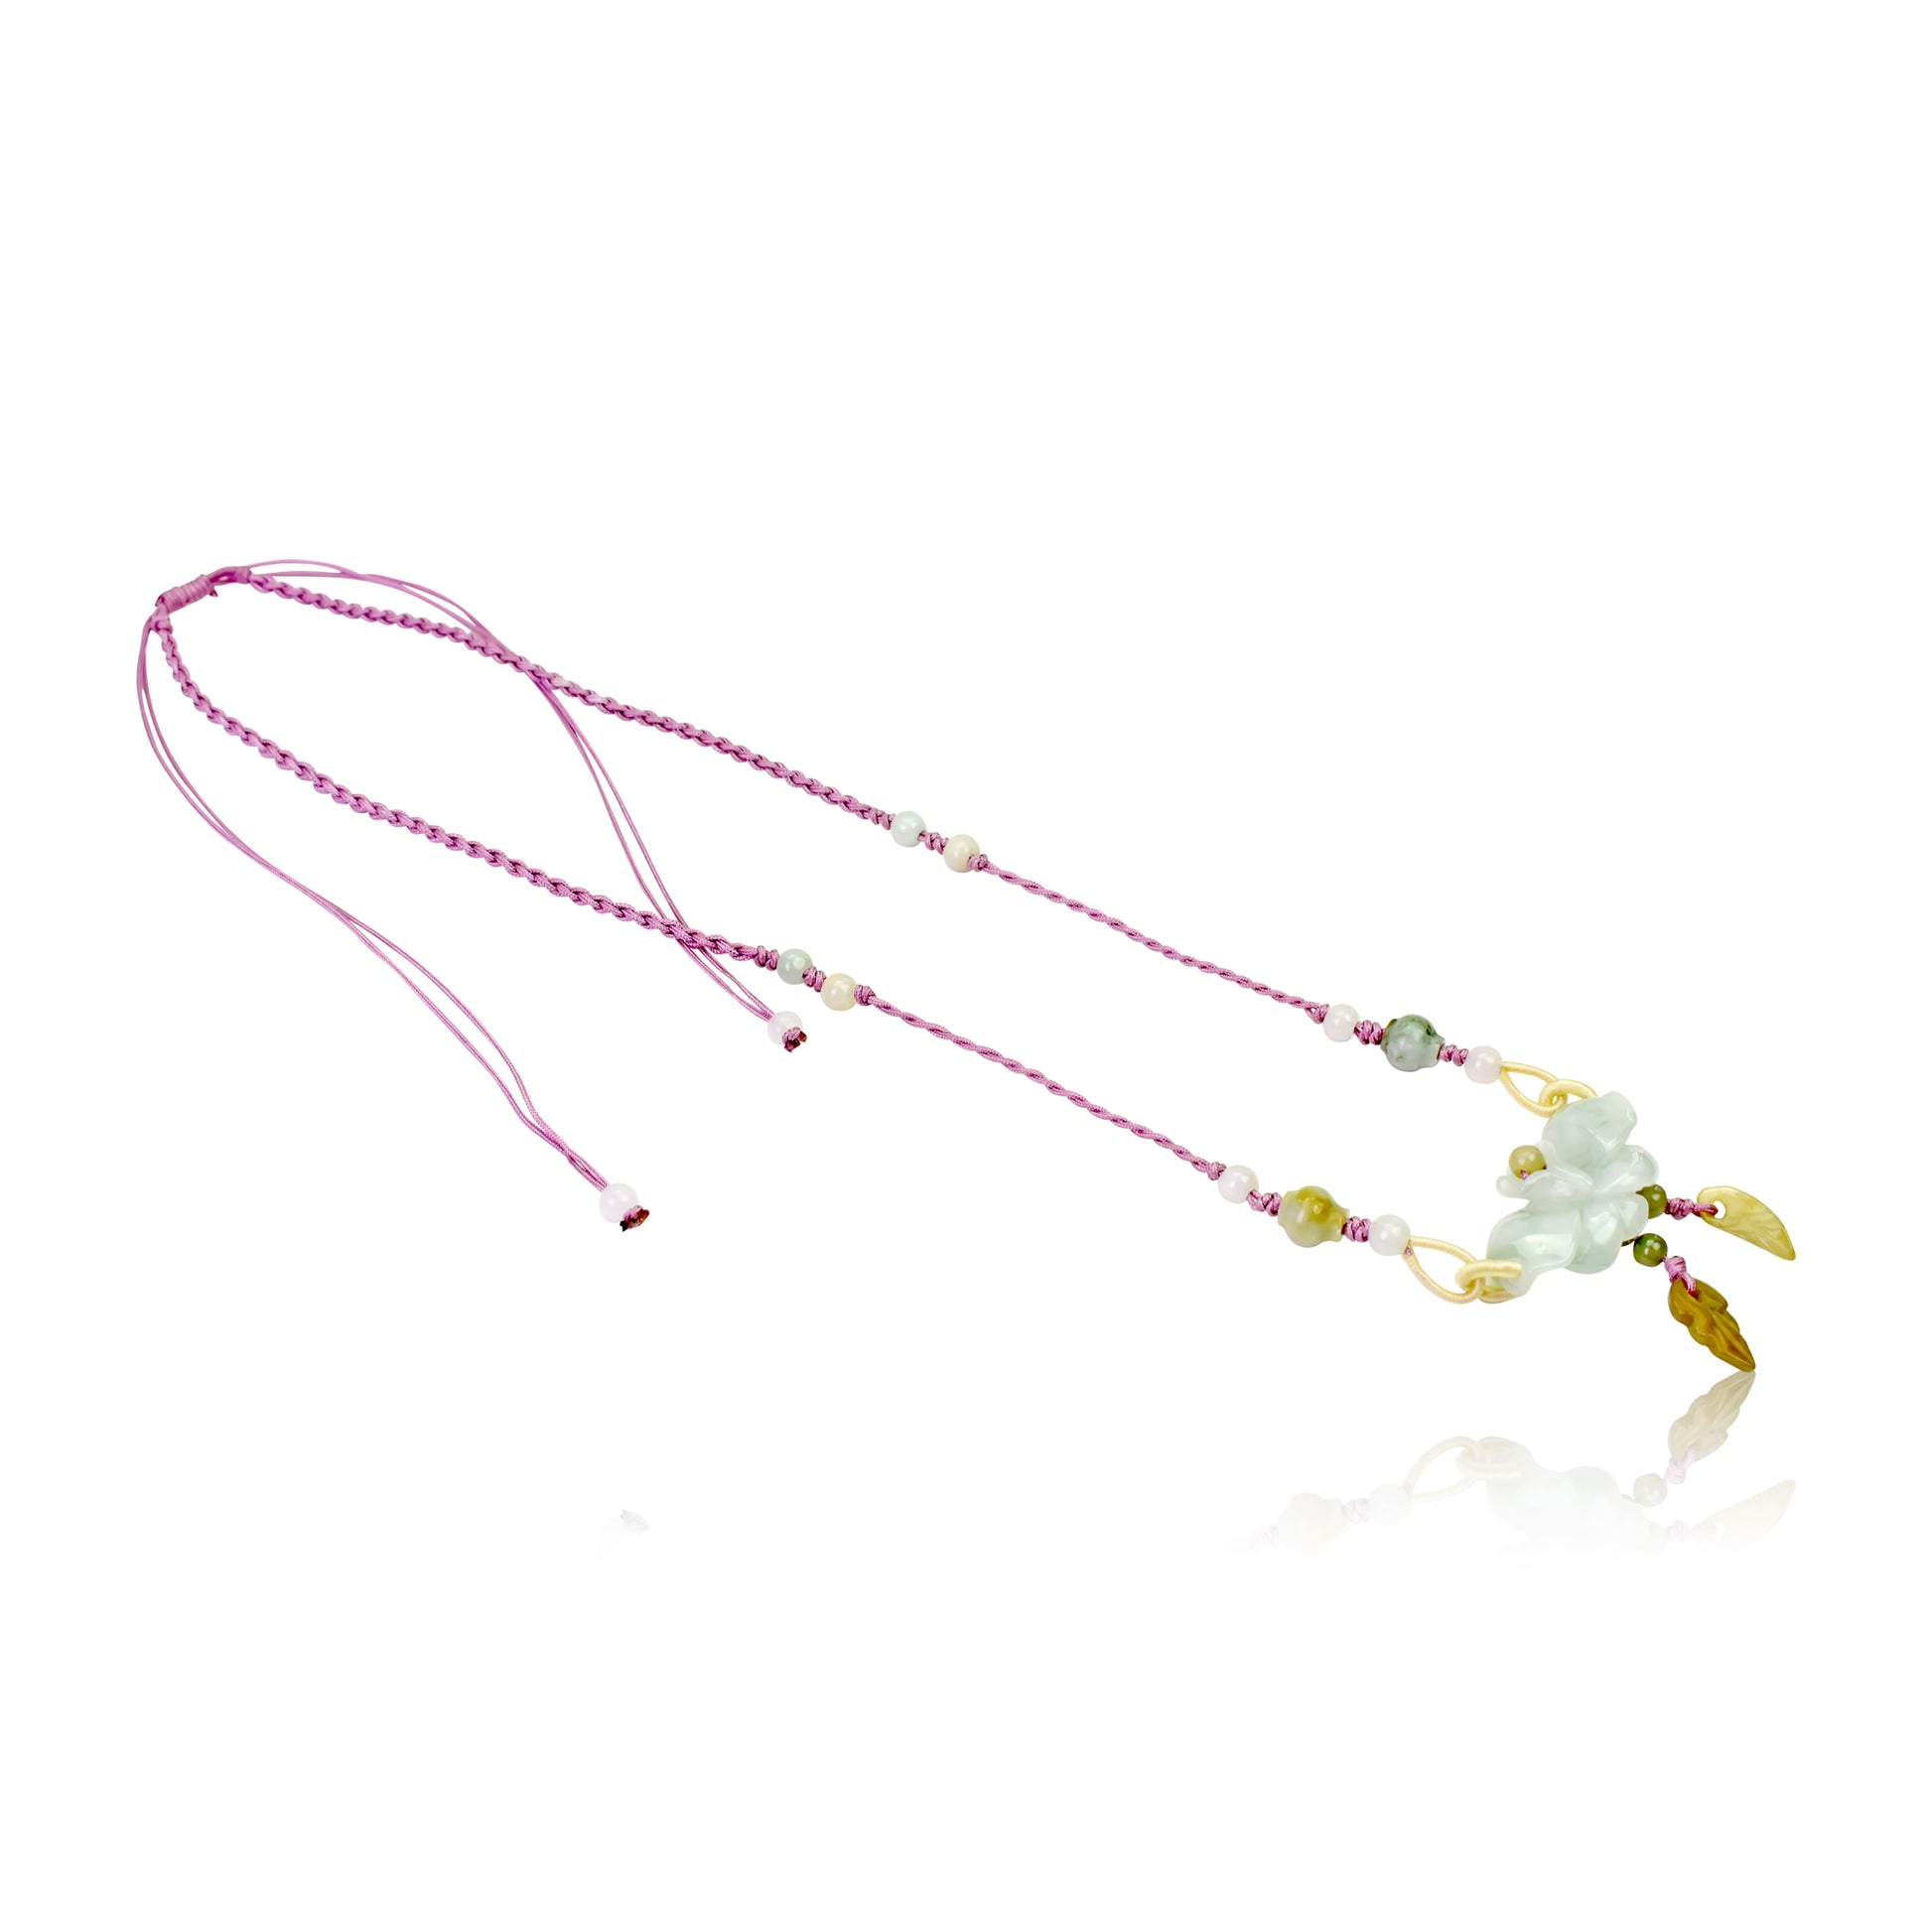 Look Refresh with the Butterfly Orchid Jade Necklace made with Lavender Cord